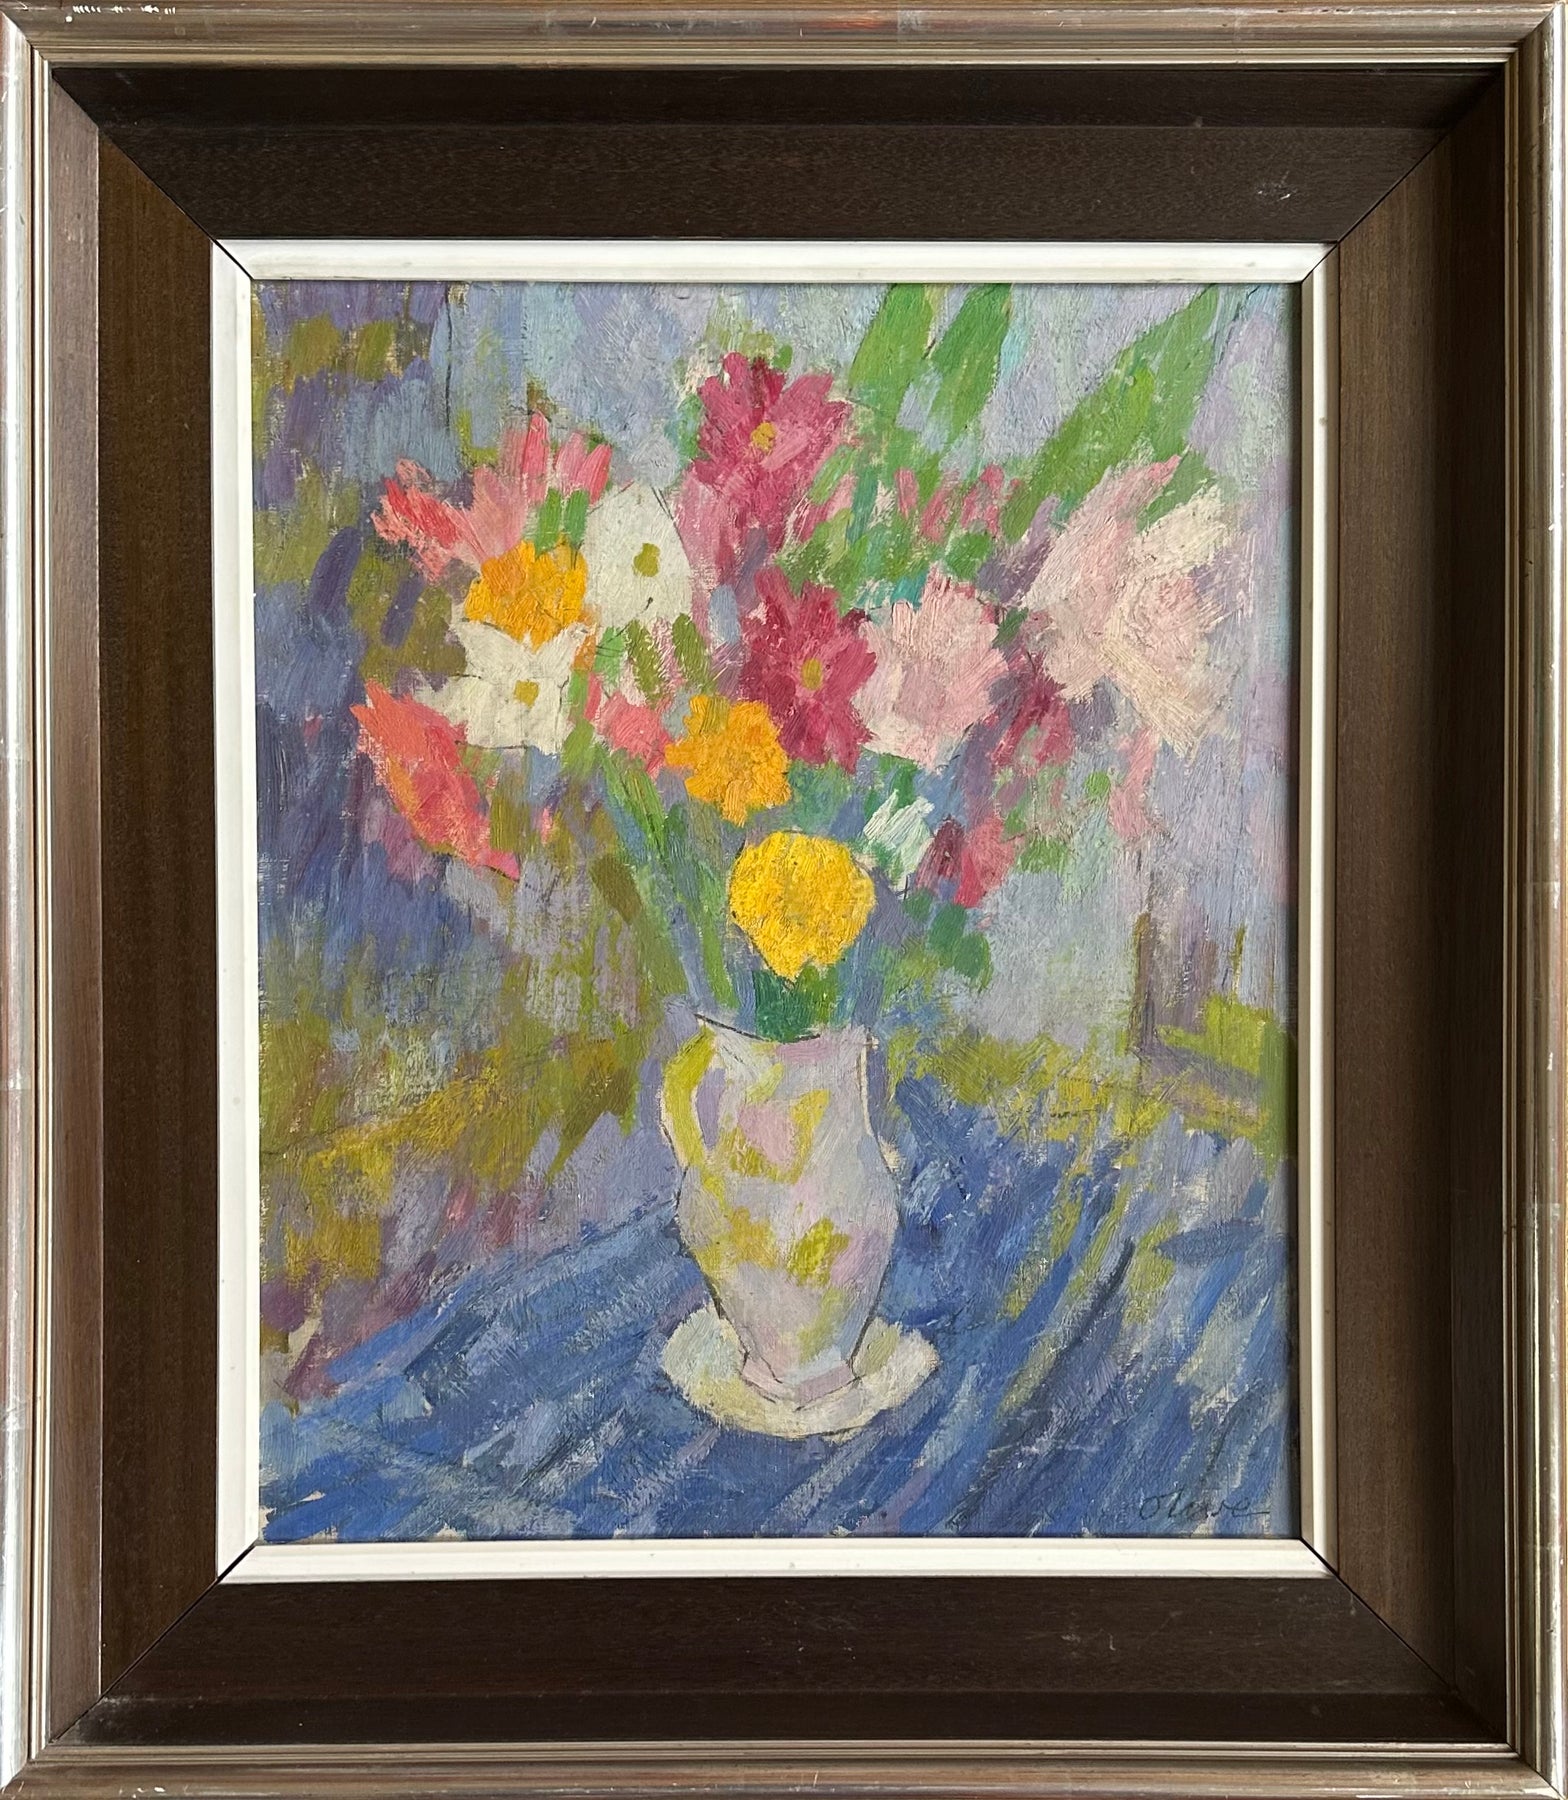 Still life painting of a vase of yellow, pink, and white flowers in an impressionist style.